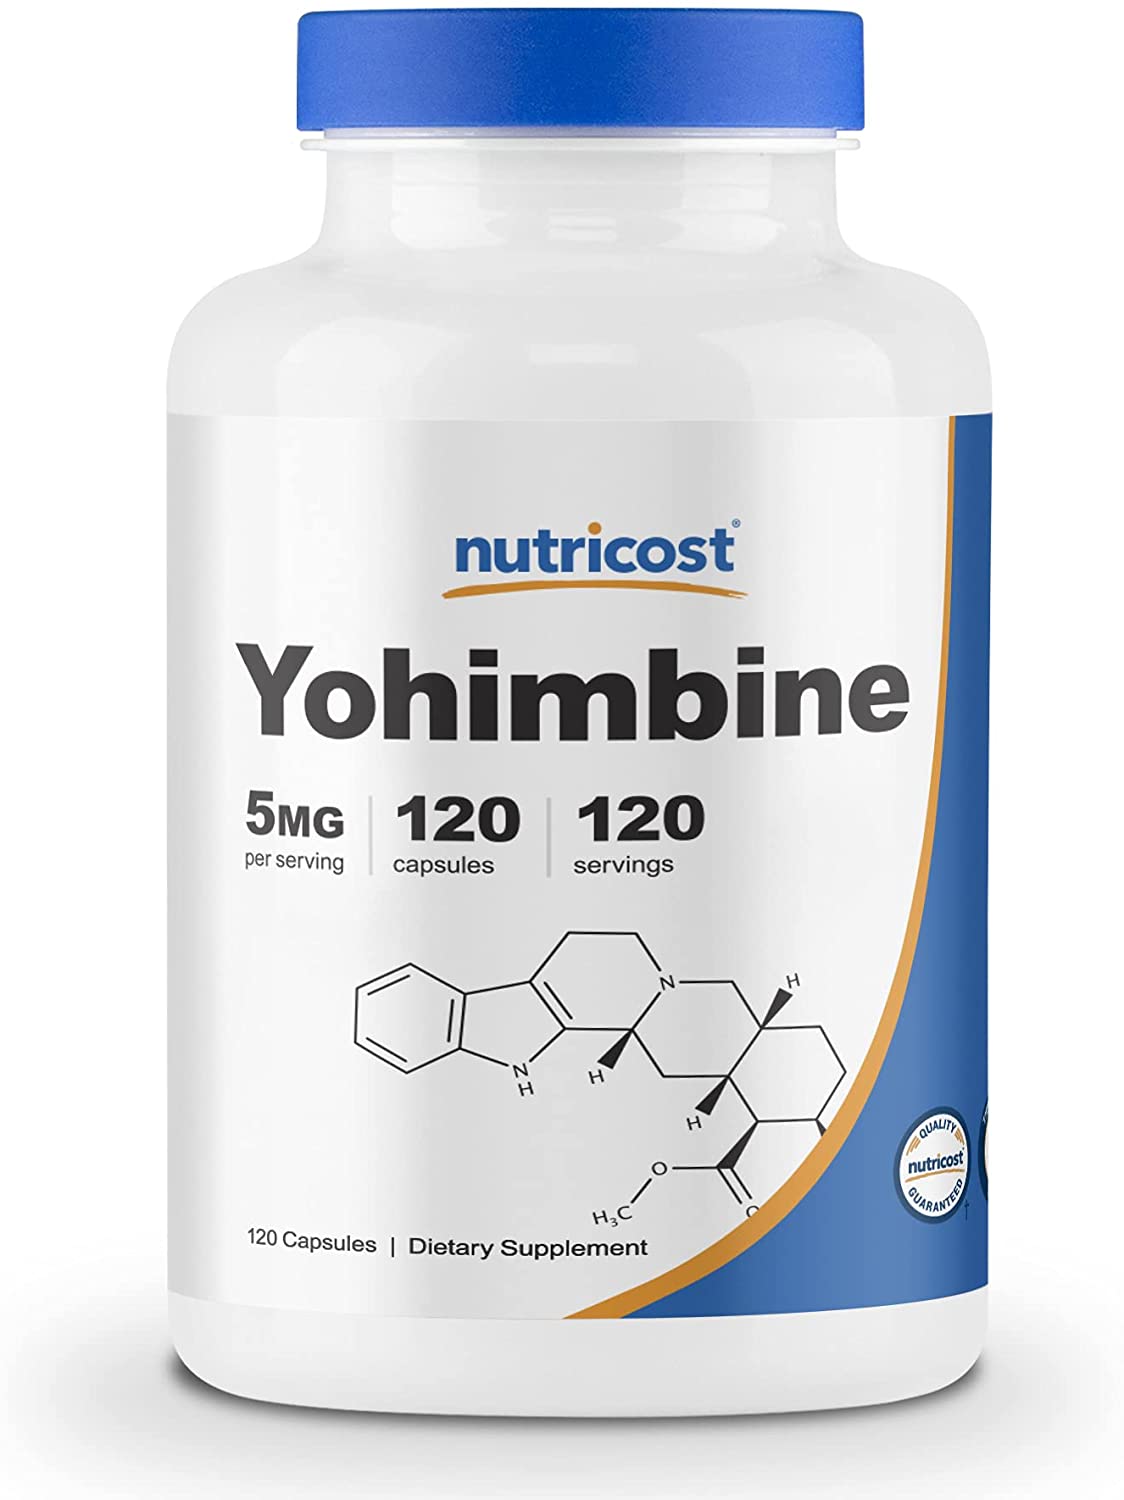 Yohimbine - Helps Erections, Burns Fat and more